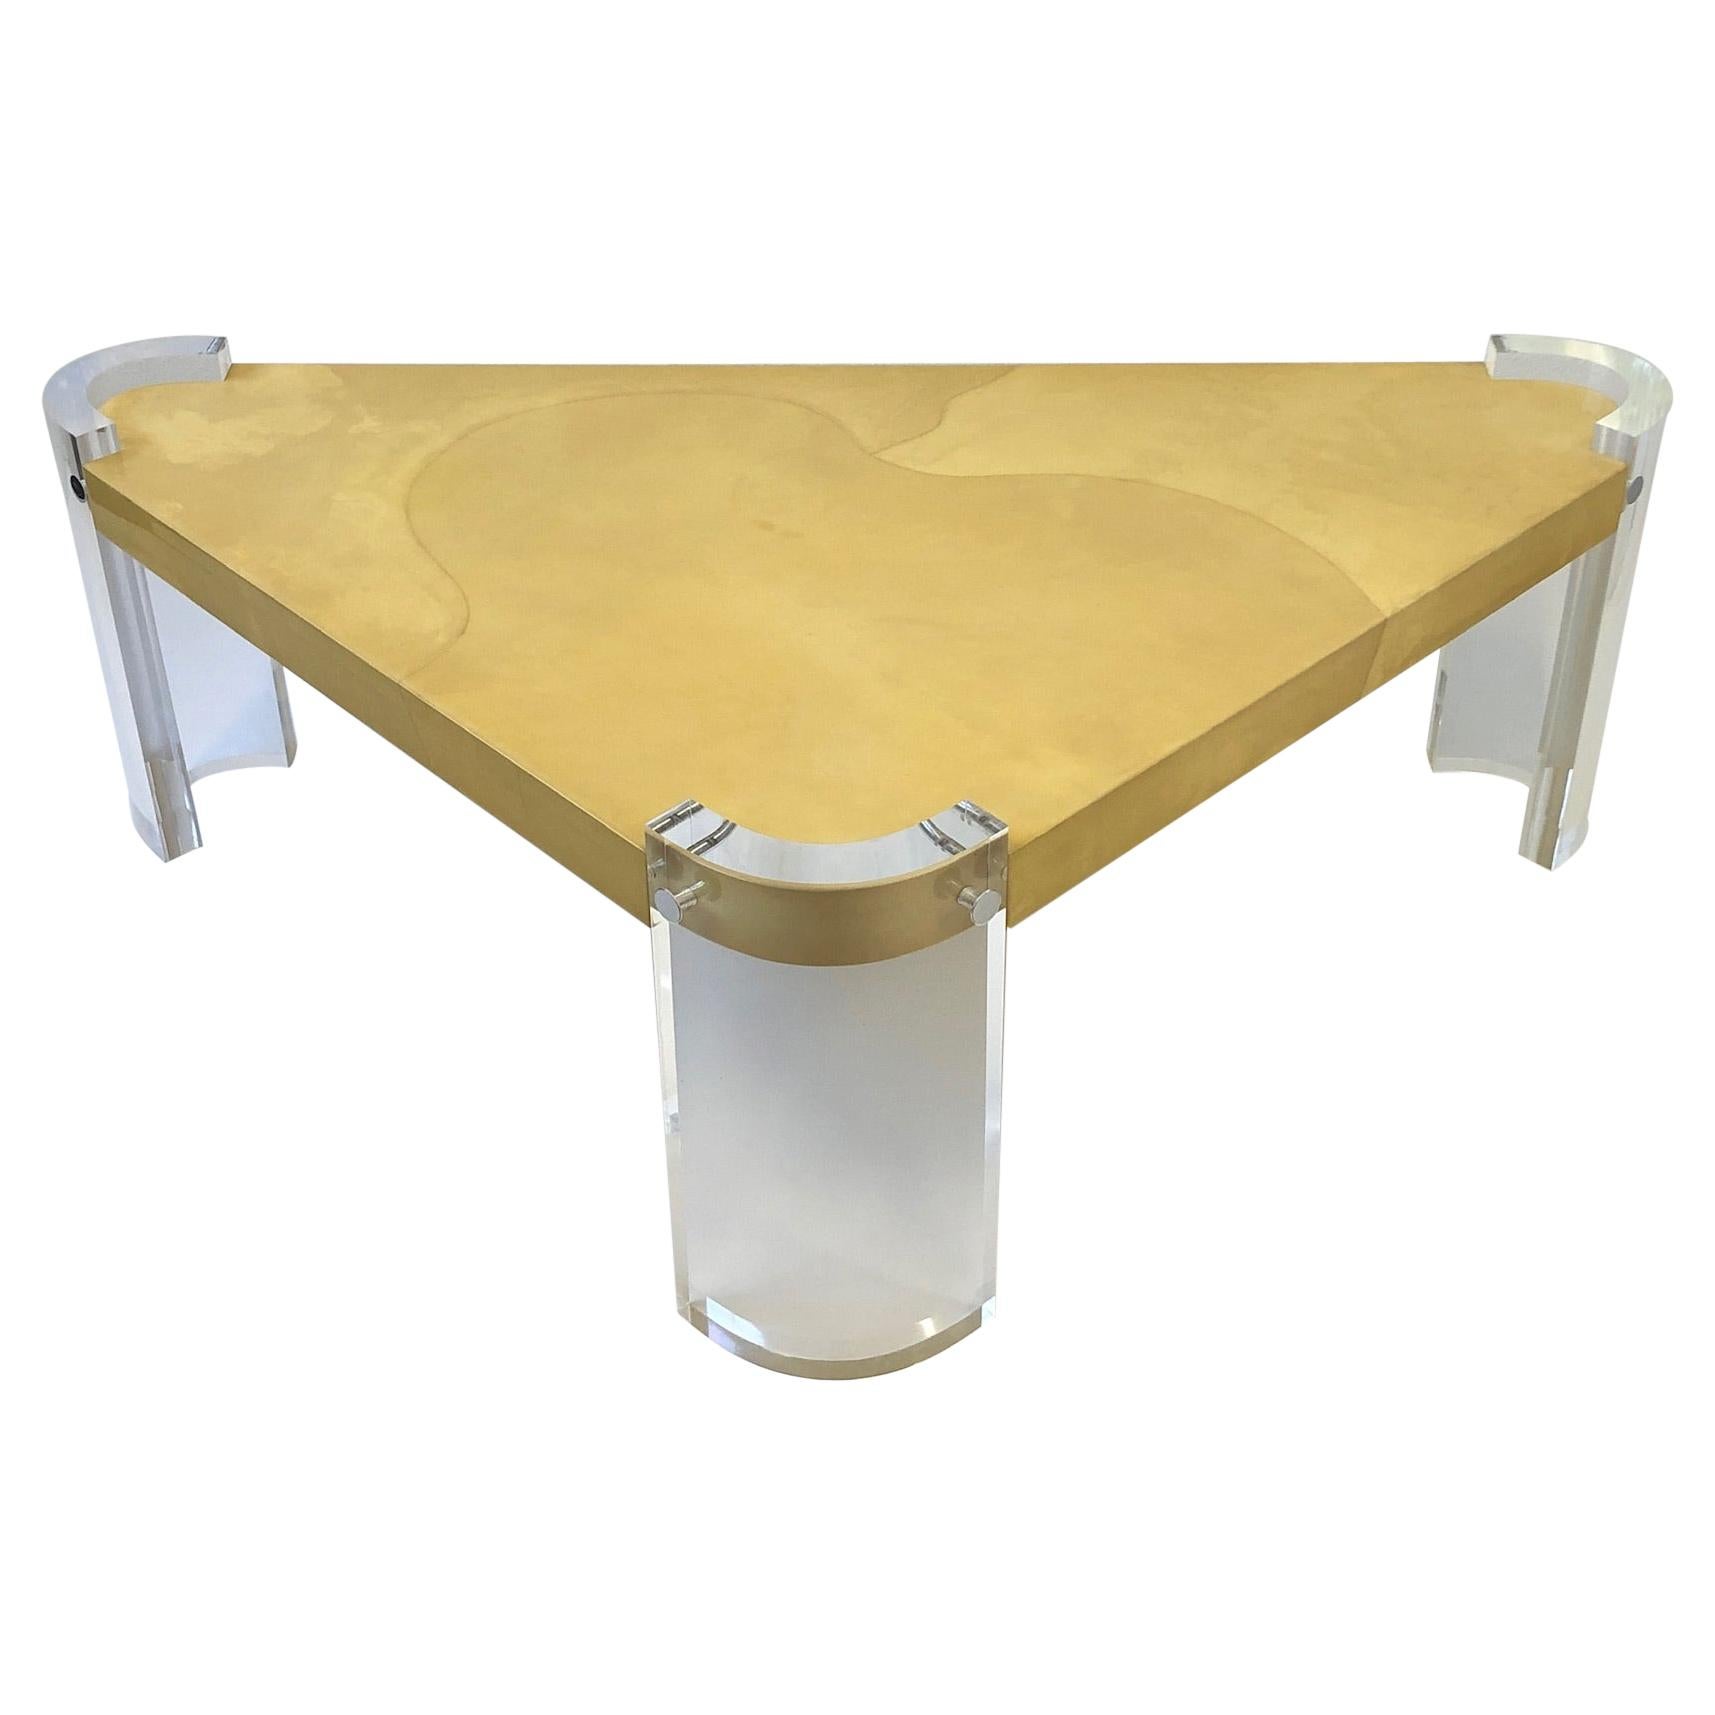 Lucite and Goatskin Parchment Triangular Shaped Coffee Table